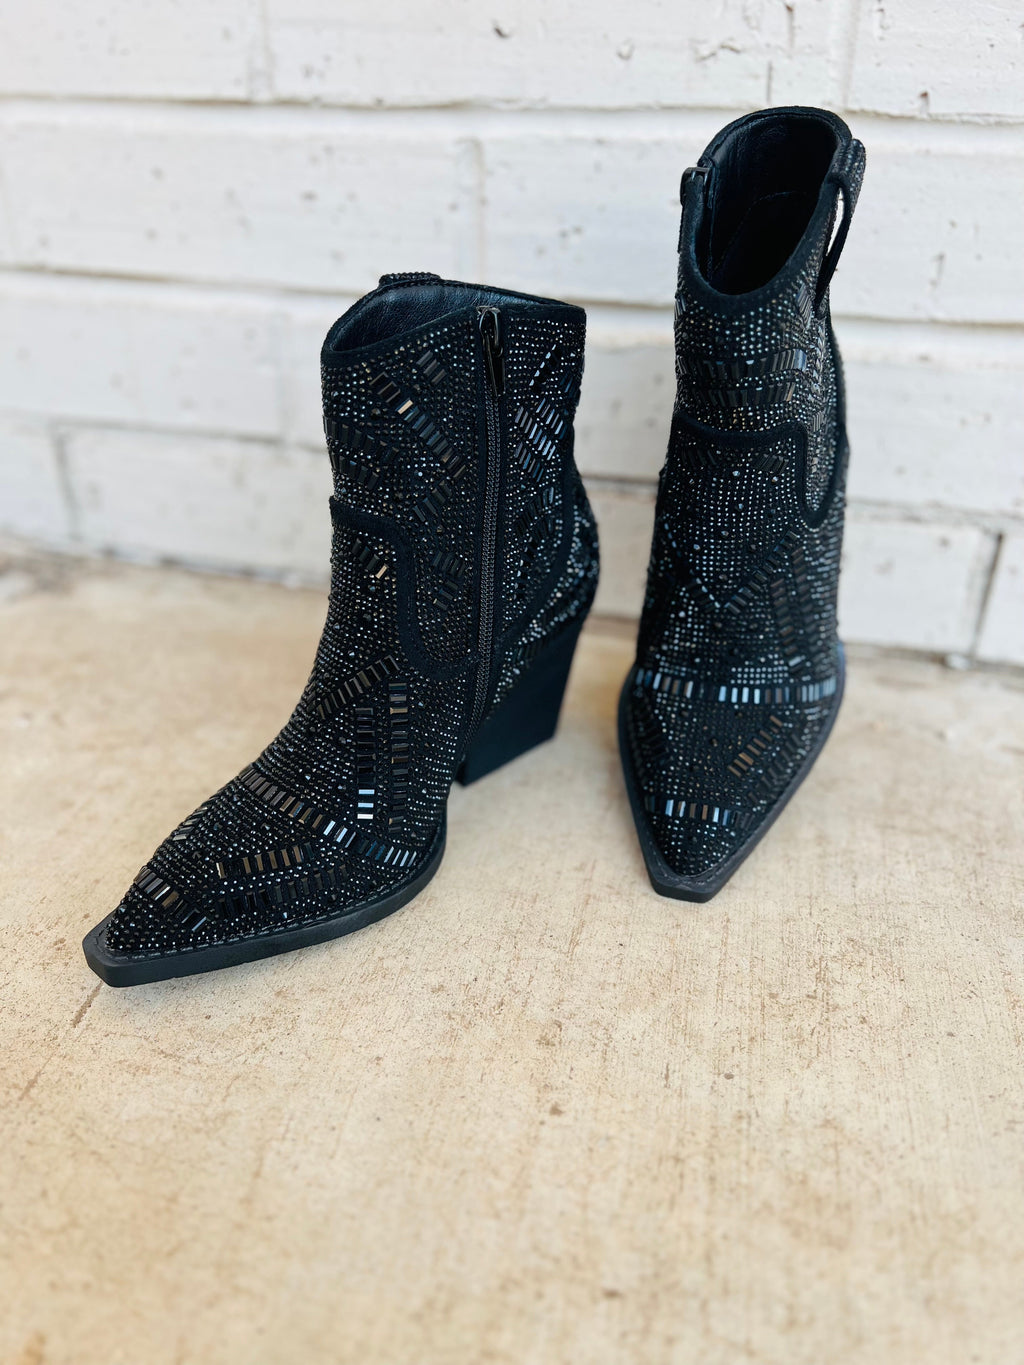 The Black Maze of Life Booties are your shortcut to style! With a 3" heel, pointed toe and black rhinestone maze design details, you'll strut in confidence and find your way through life with ease. Plus, the inside zipper means you won't find yourself endlessly searching for a way out. Look great, feel great!